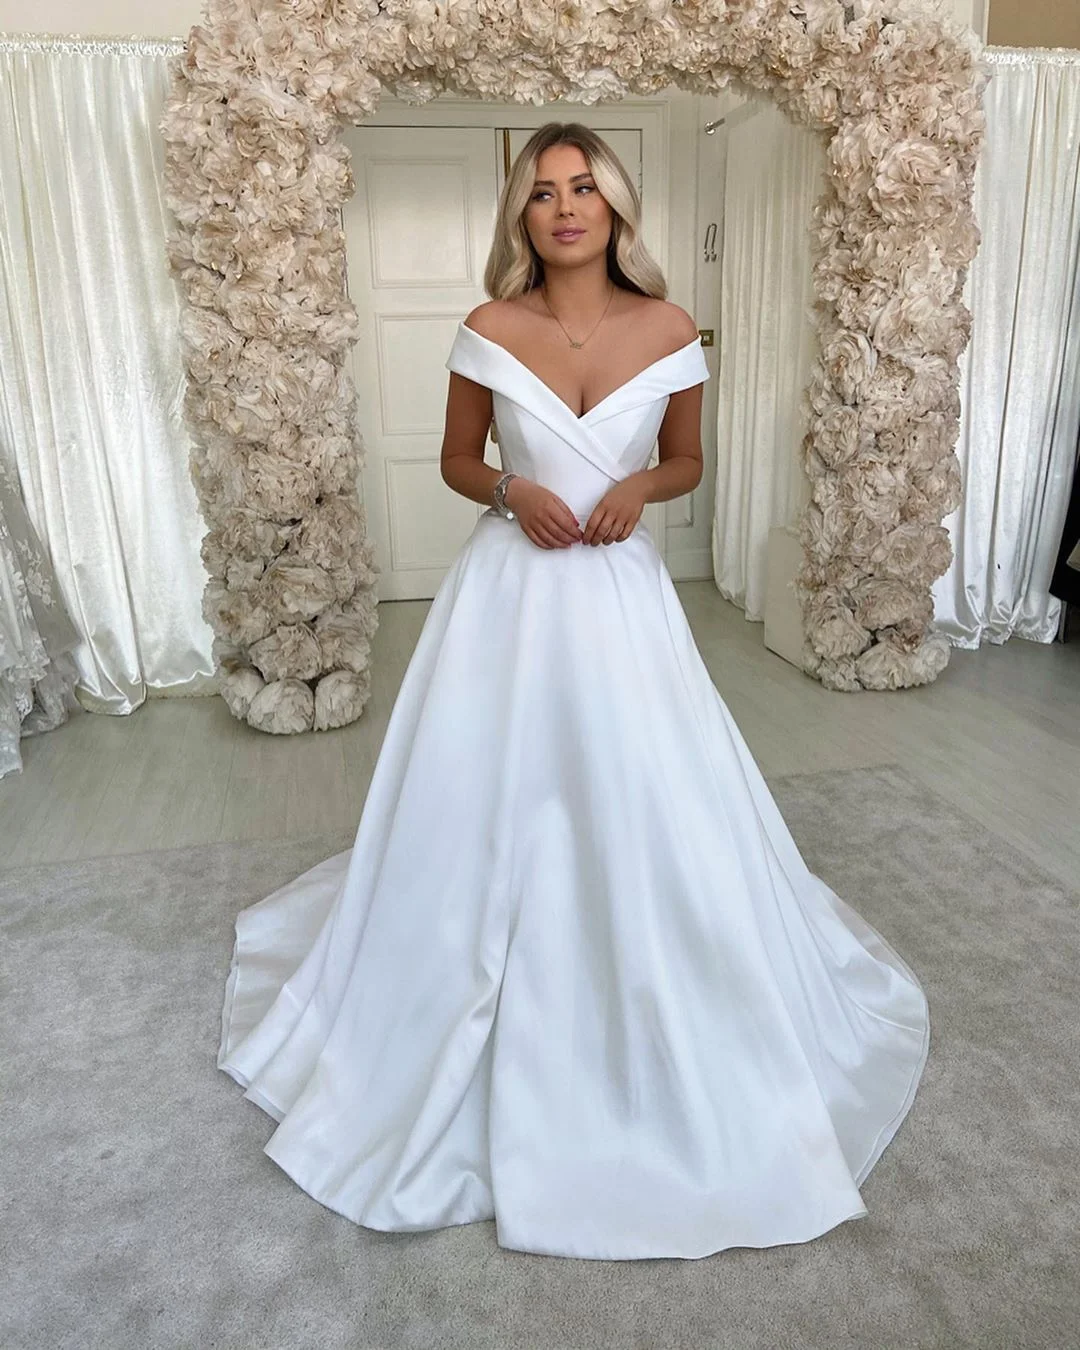 Luluslly Glamorous Long Off-the-Shoulder Sweetheart Backless Wedding Dress With Stain